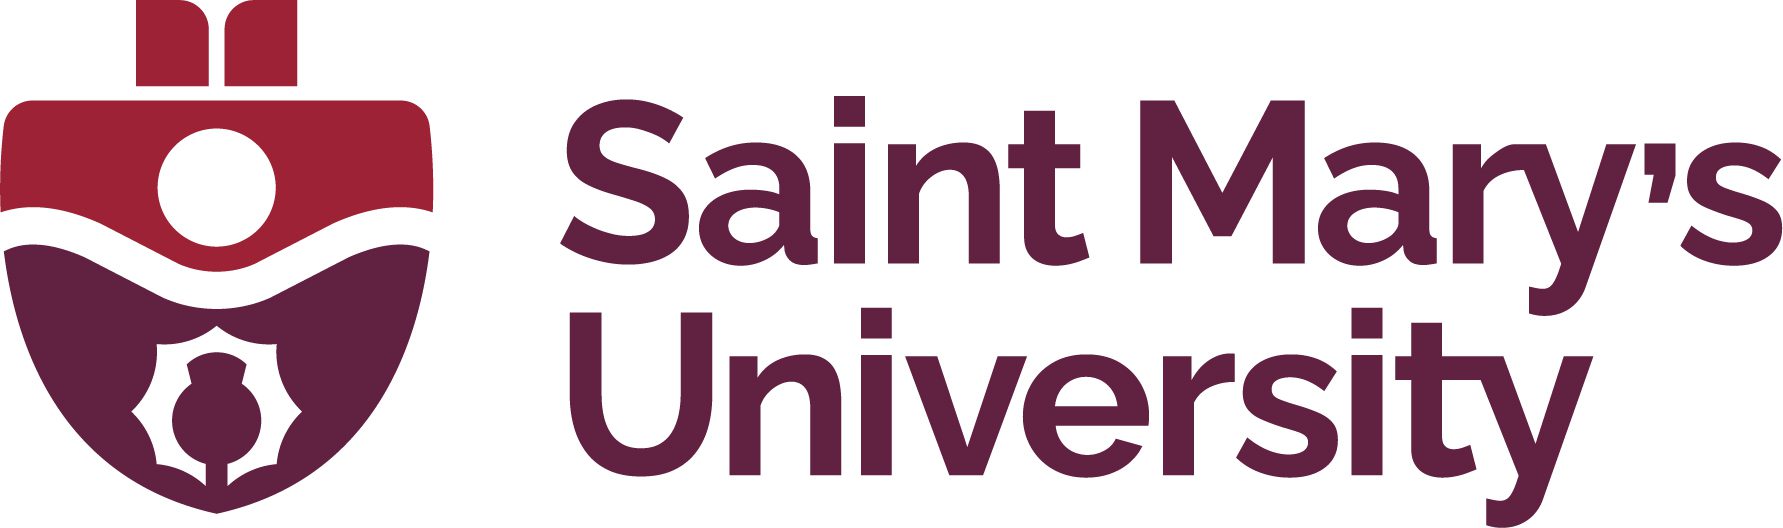 Saint Mary's University, Department of Finance, Information Systems and Management Science logo